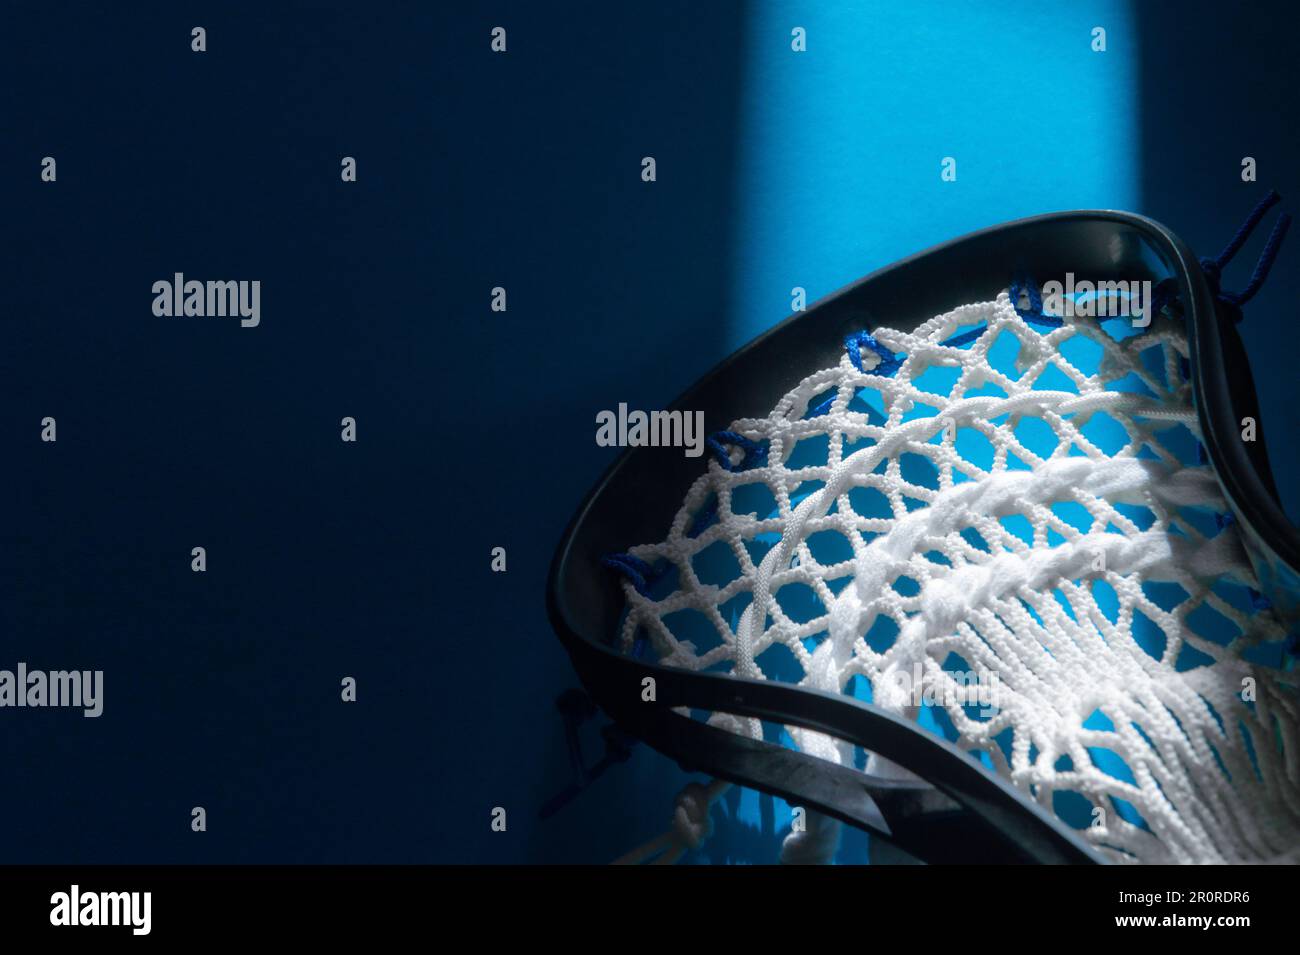 Lacrosse stick on blue background. Horizontal sport theme poster, greeting cards, headers, website and app Stock Photo